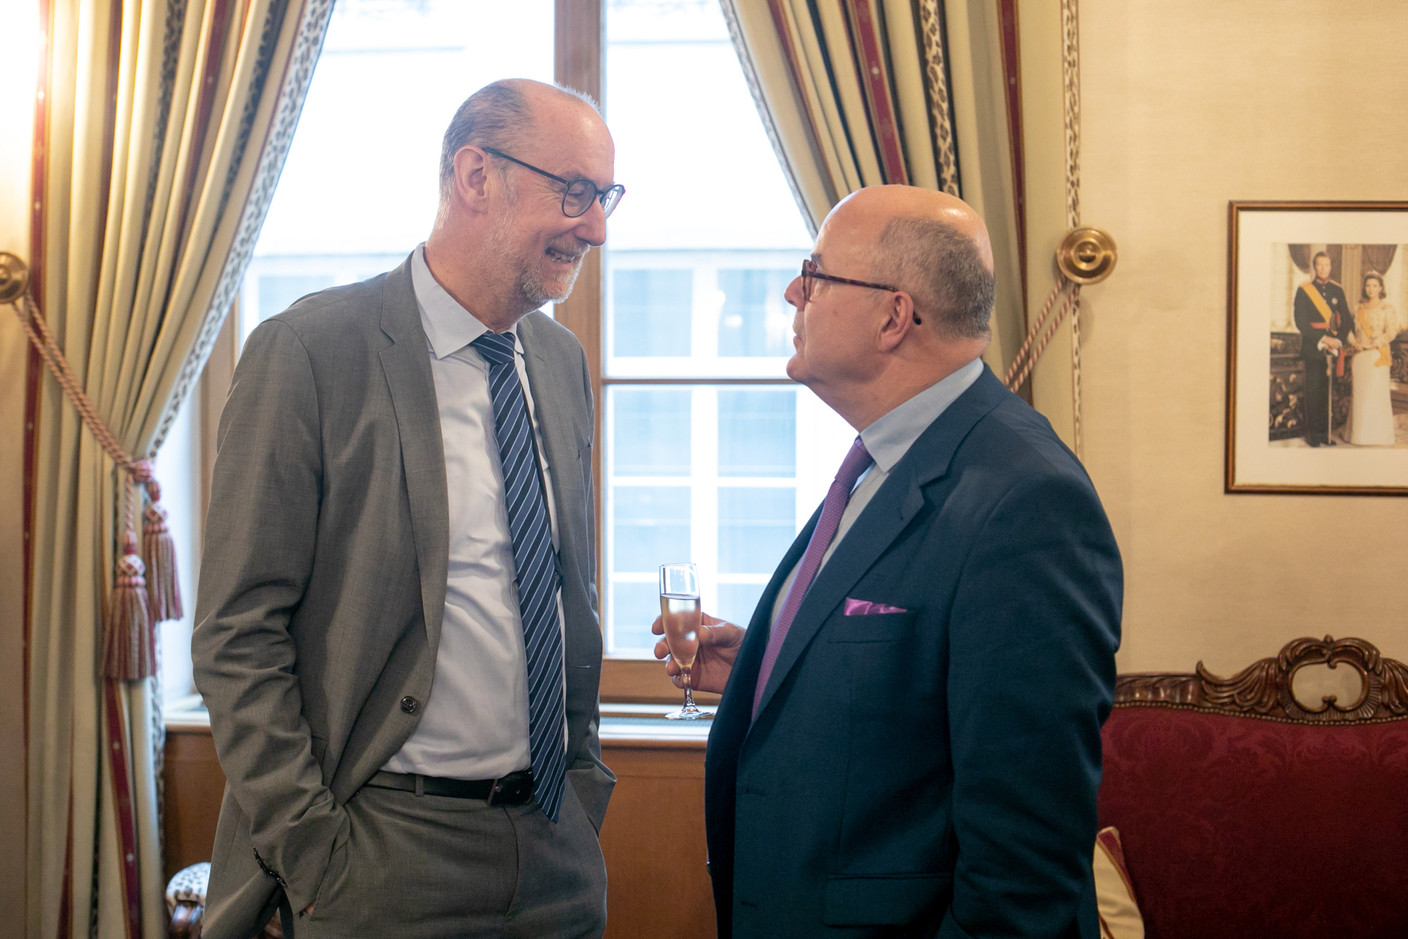 Gilles Baum, leader of the DP fraction, here in discussion with CSV MP Marc Spautz. Photo: Matic Zorman